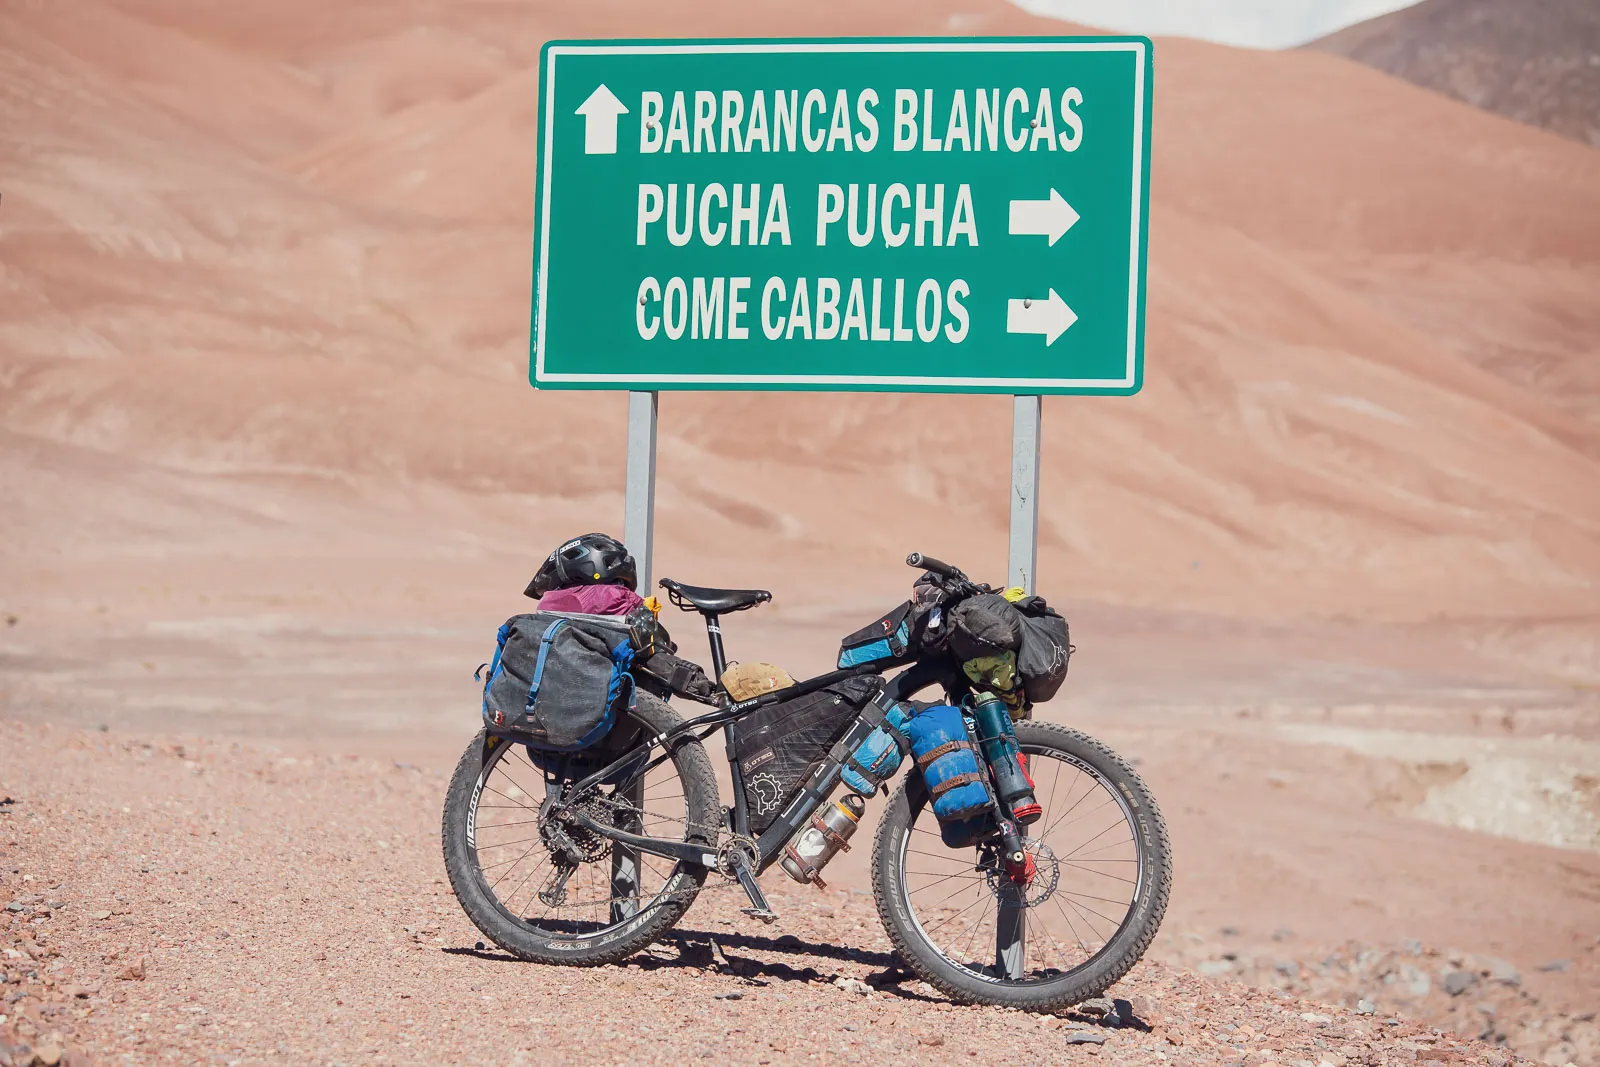 An Otso Cycles Voytek fat bike leans against a street sign in the Andes Mountains. The hills behind are covered in rocks and sand. The sign reads Barrancas Blancas, Pucha Pucha, and Come Caballos.